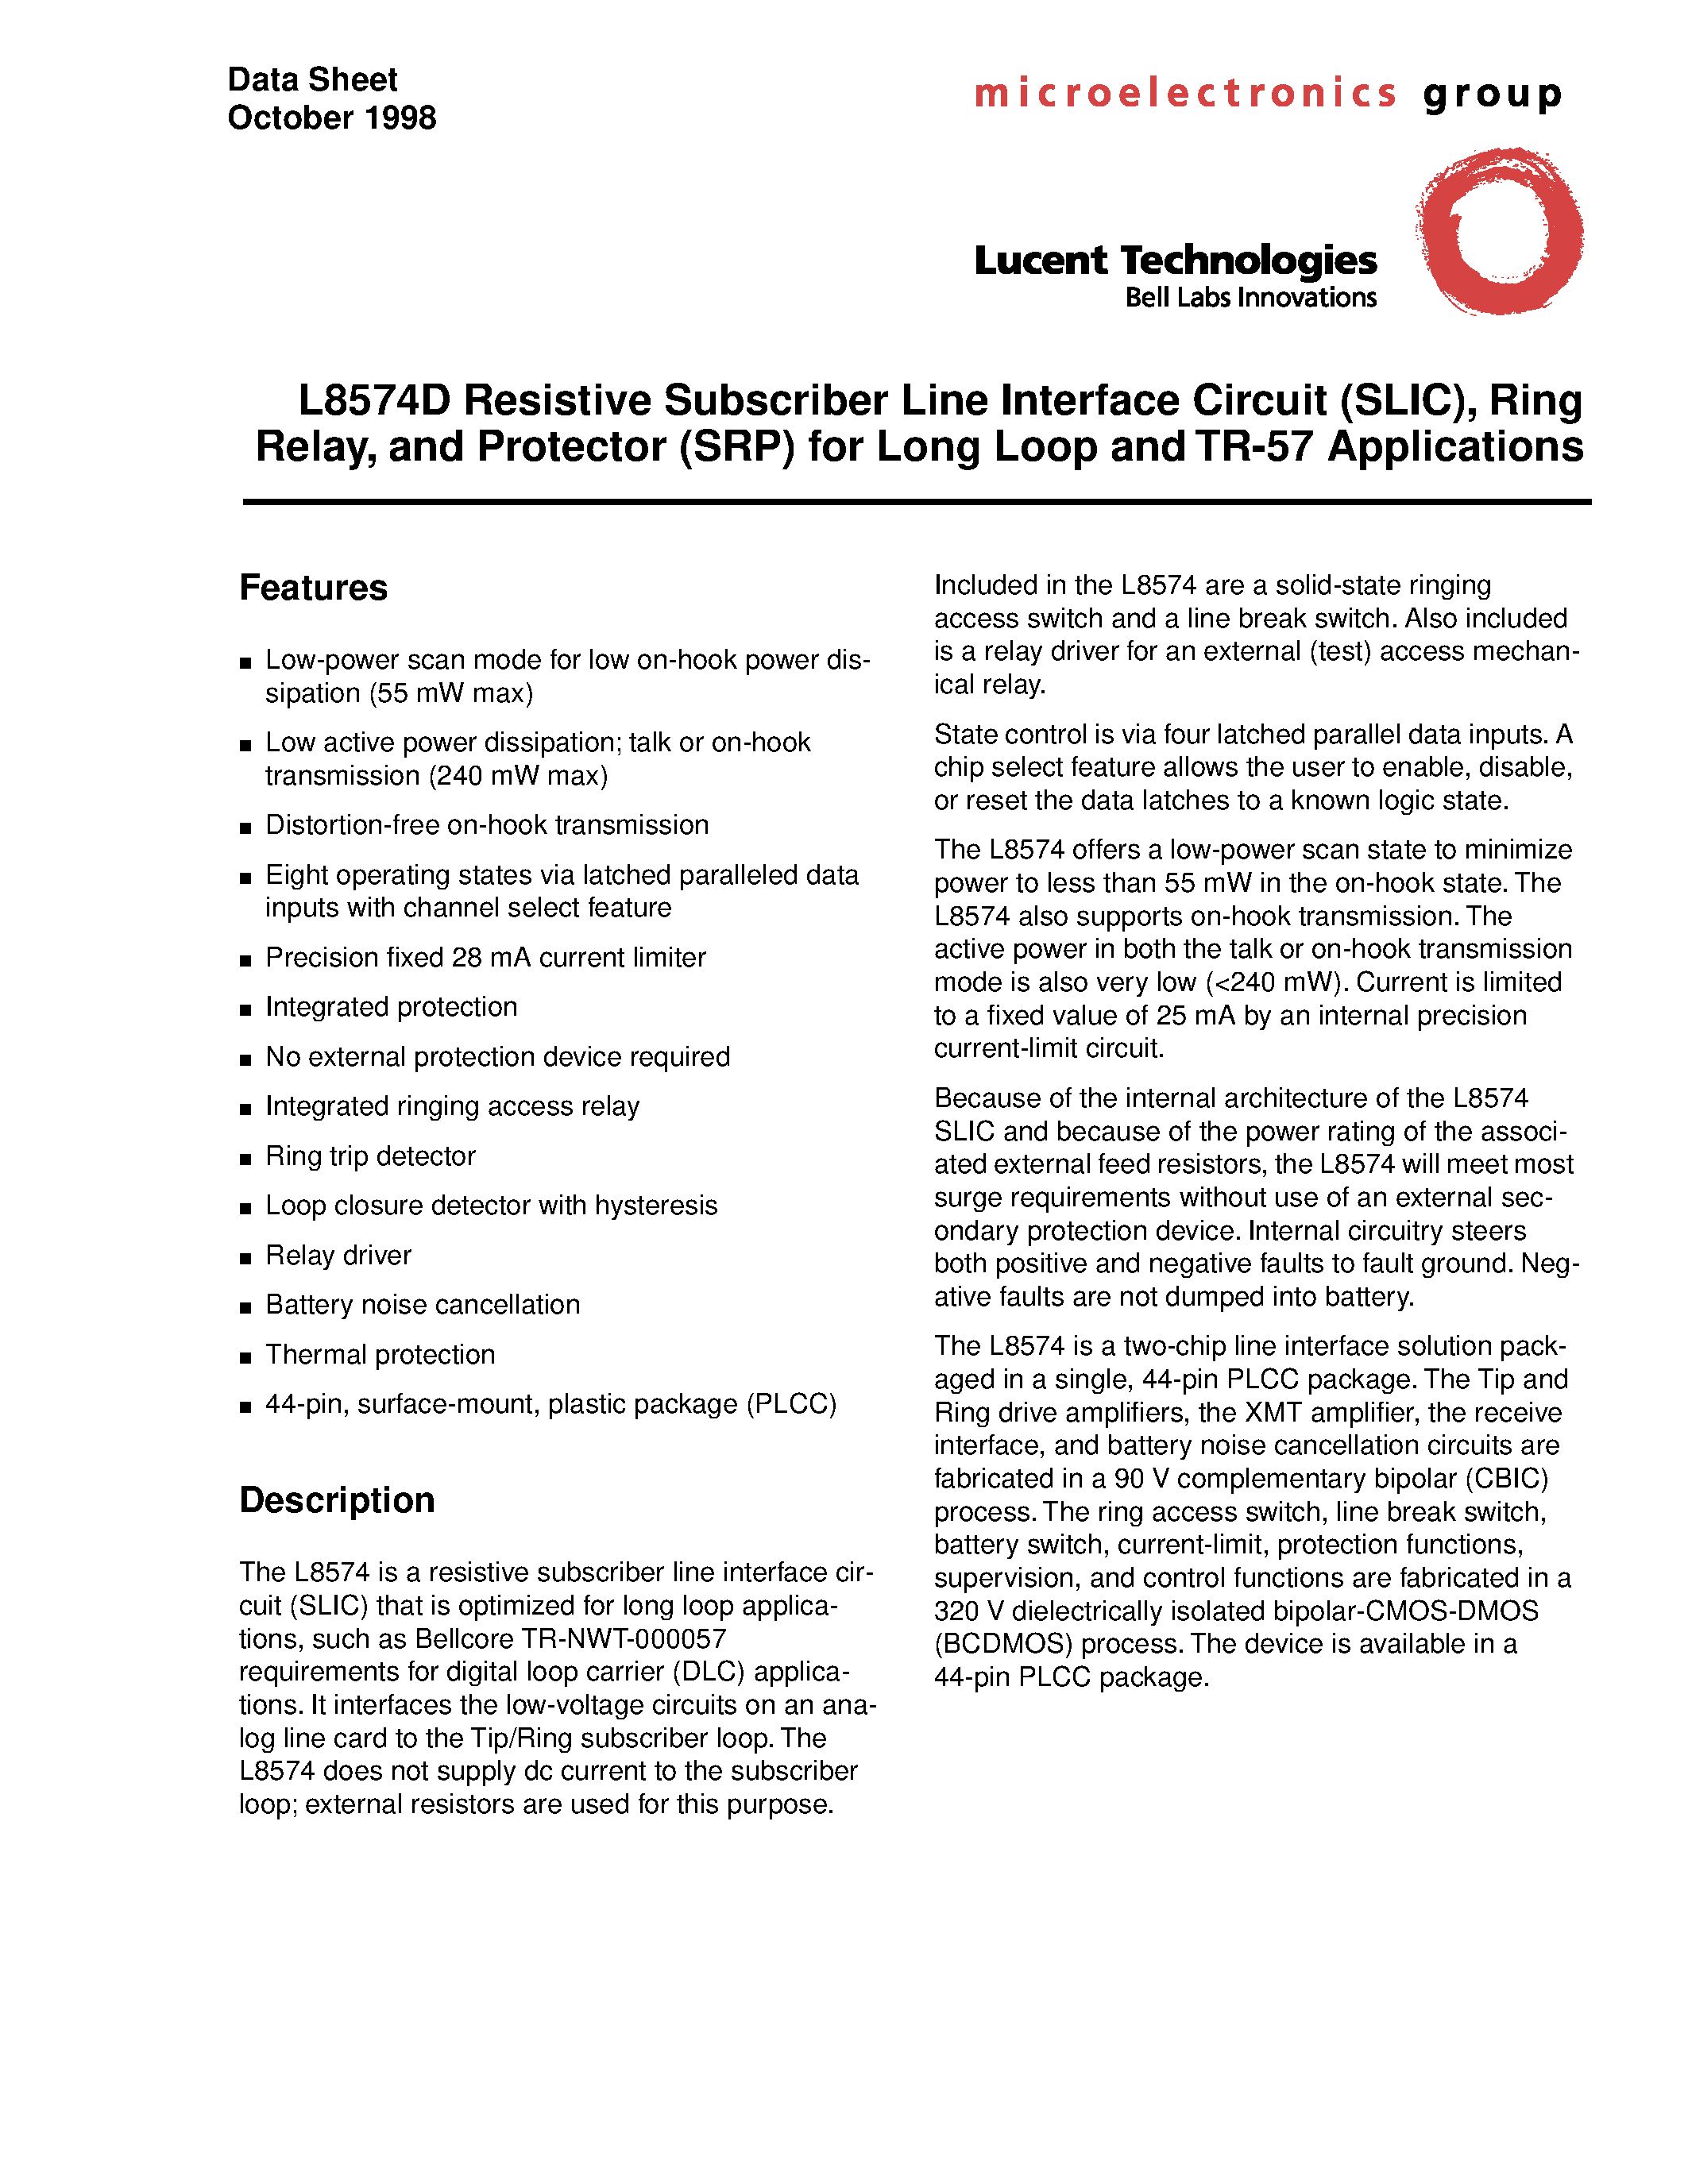 Datasheet LUCL8574DP-D - L8574D Resistive Subscriber Line Interface Circuit(SLIC)/ Ring Relay/and Protector(SRP)for Long Loop and TR-57 Applications page 1